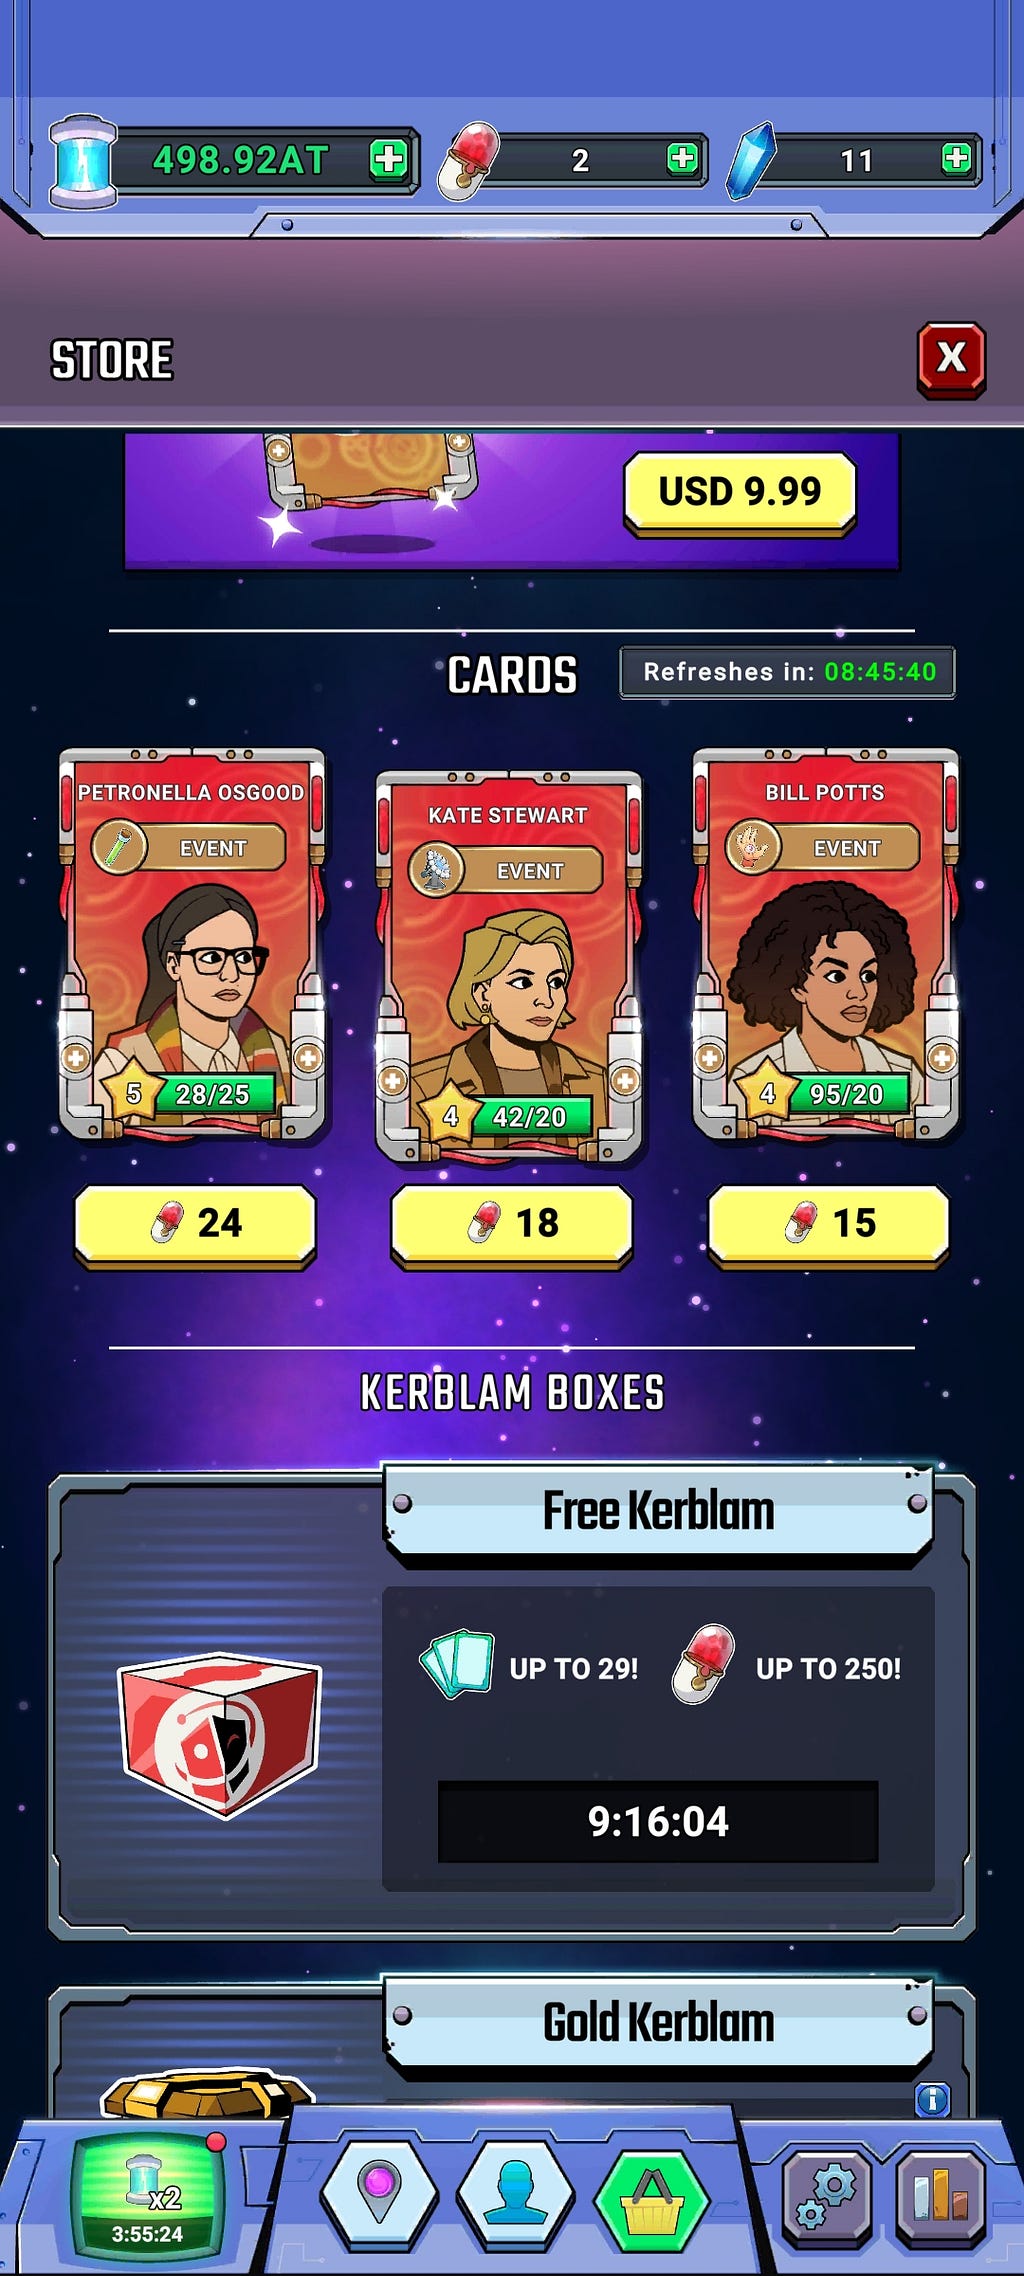 My free kerblam timer, showing over 9 hours, instead of 2.